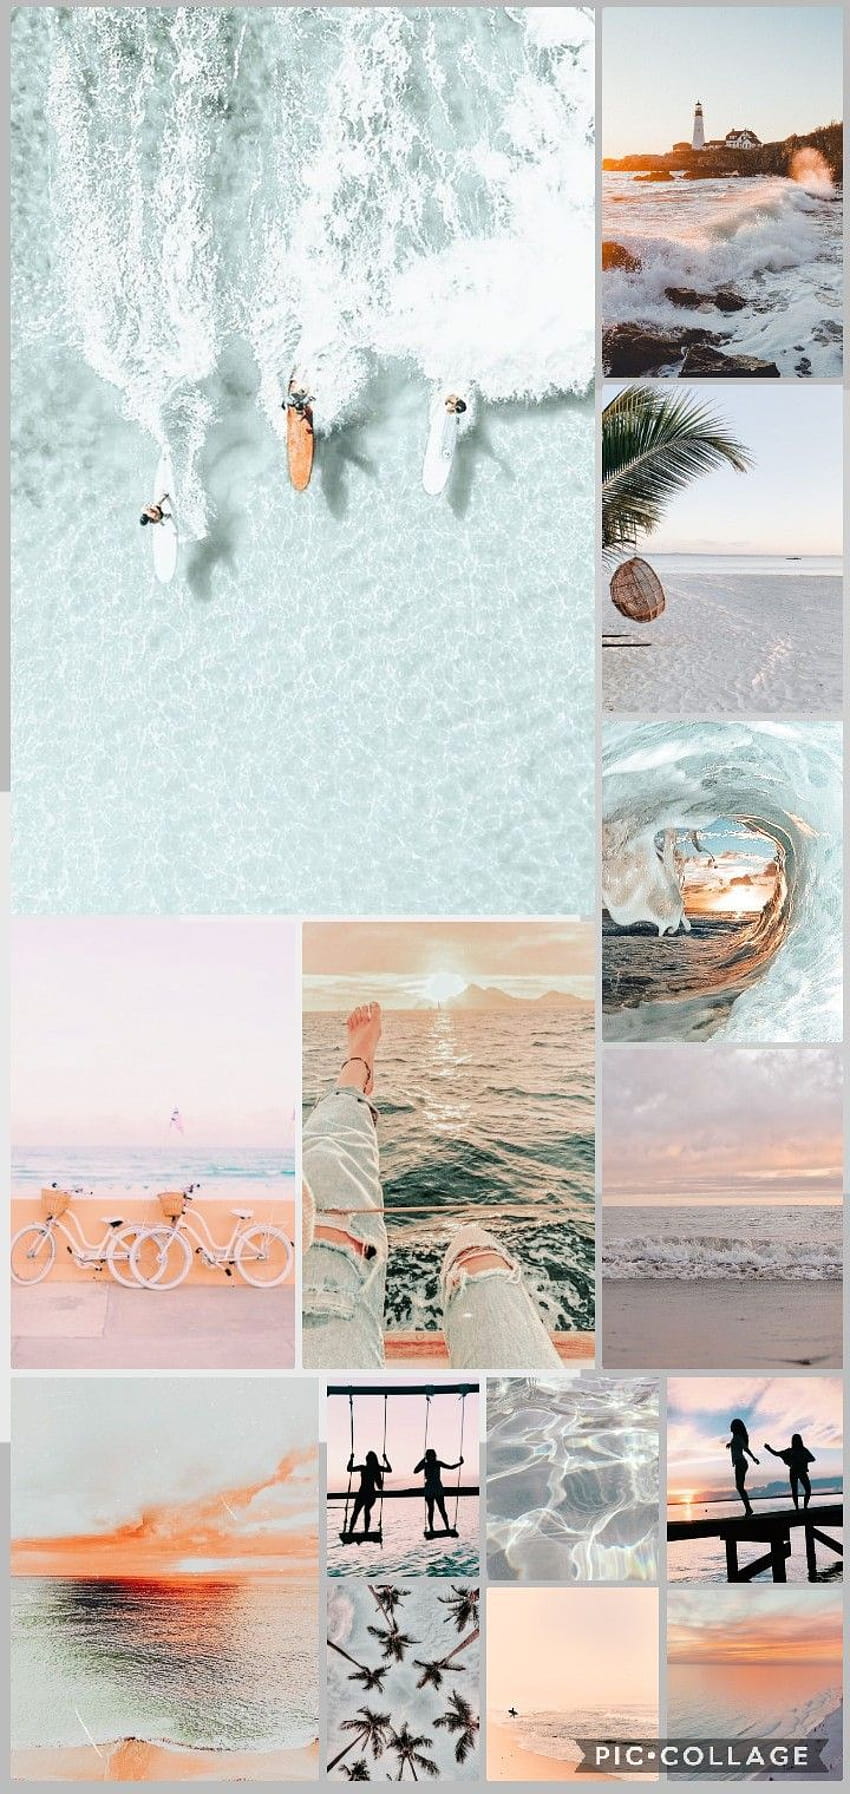 Collage of surfing photos with a teal and orange aesthetic - Beach